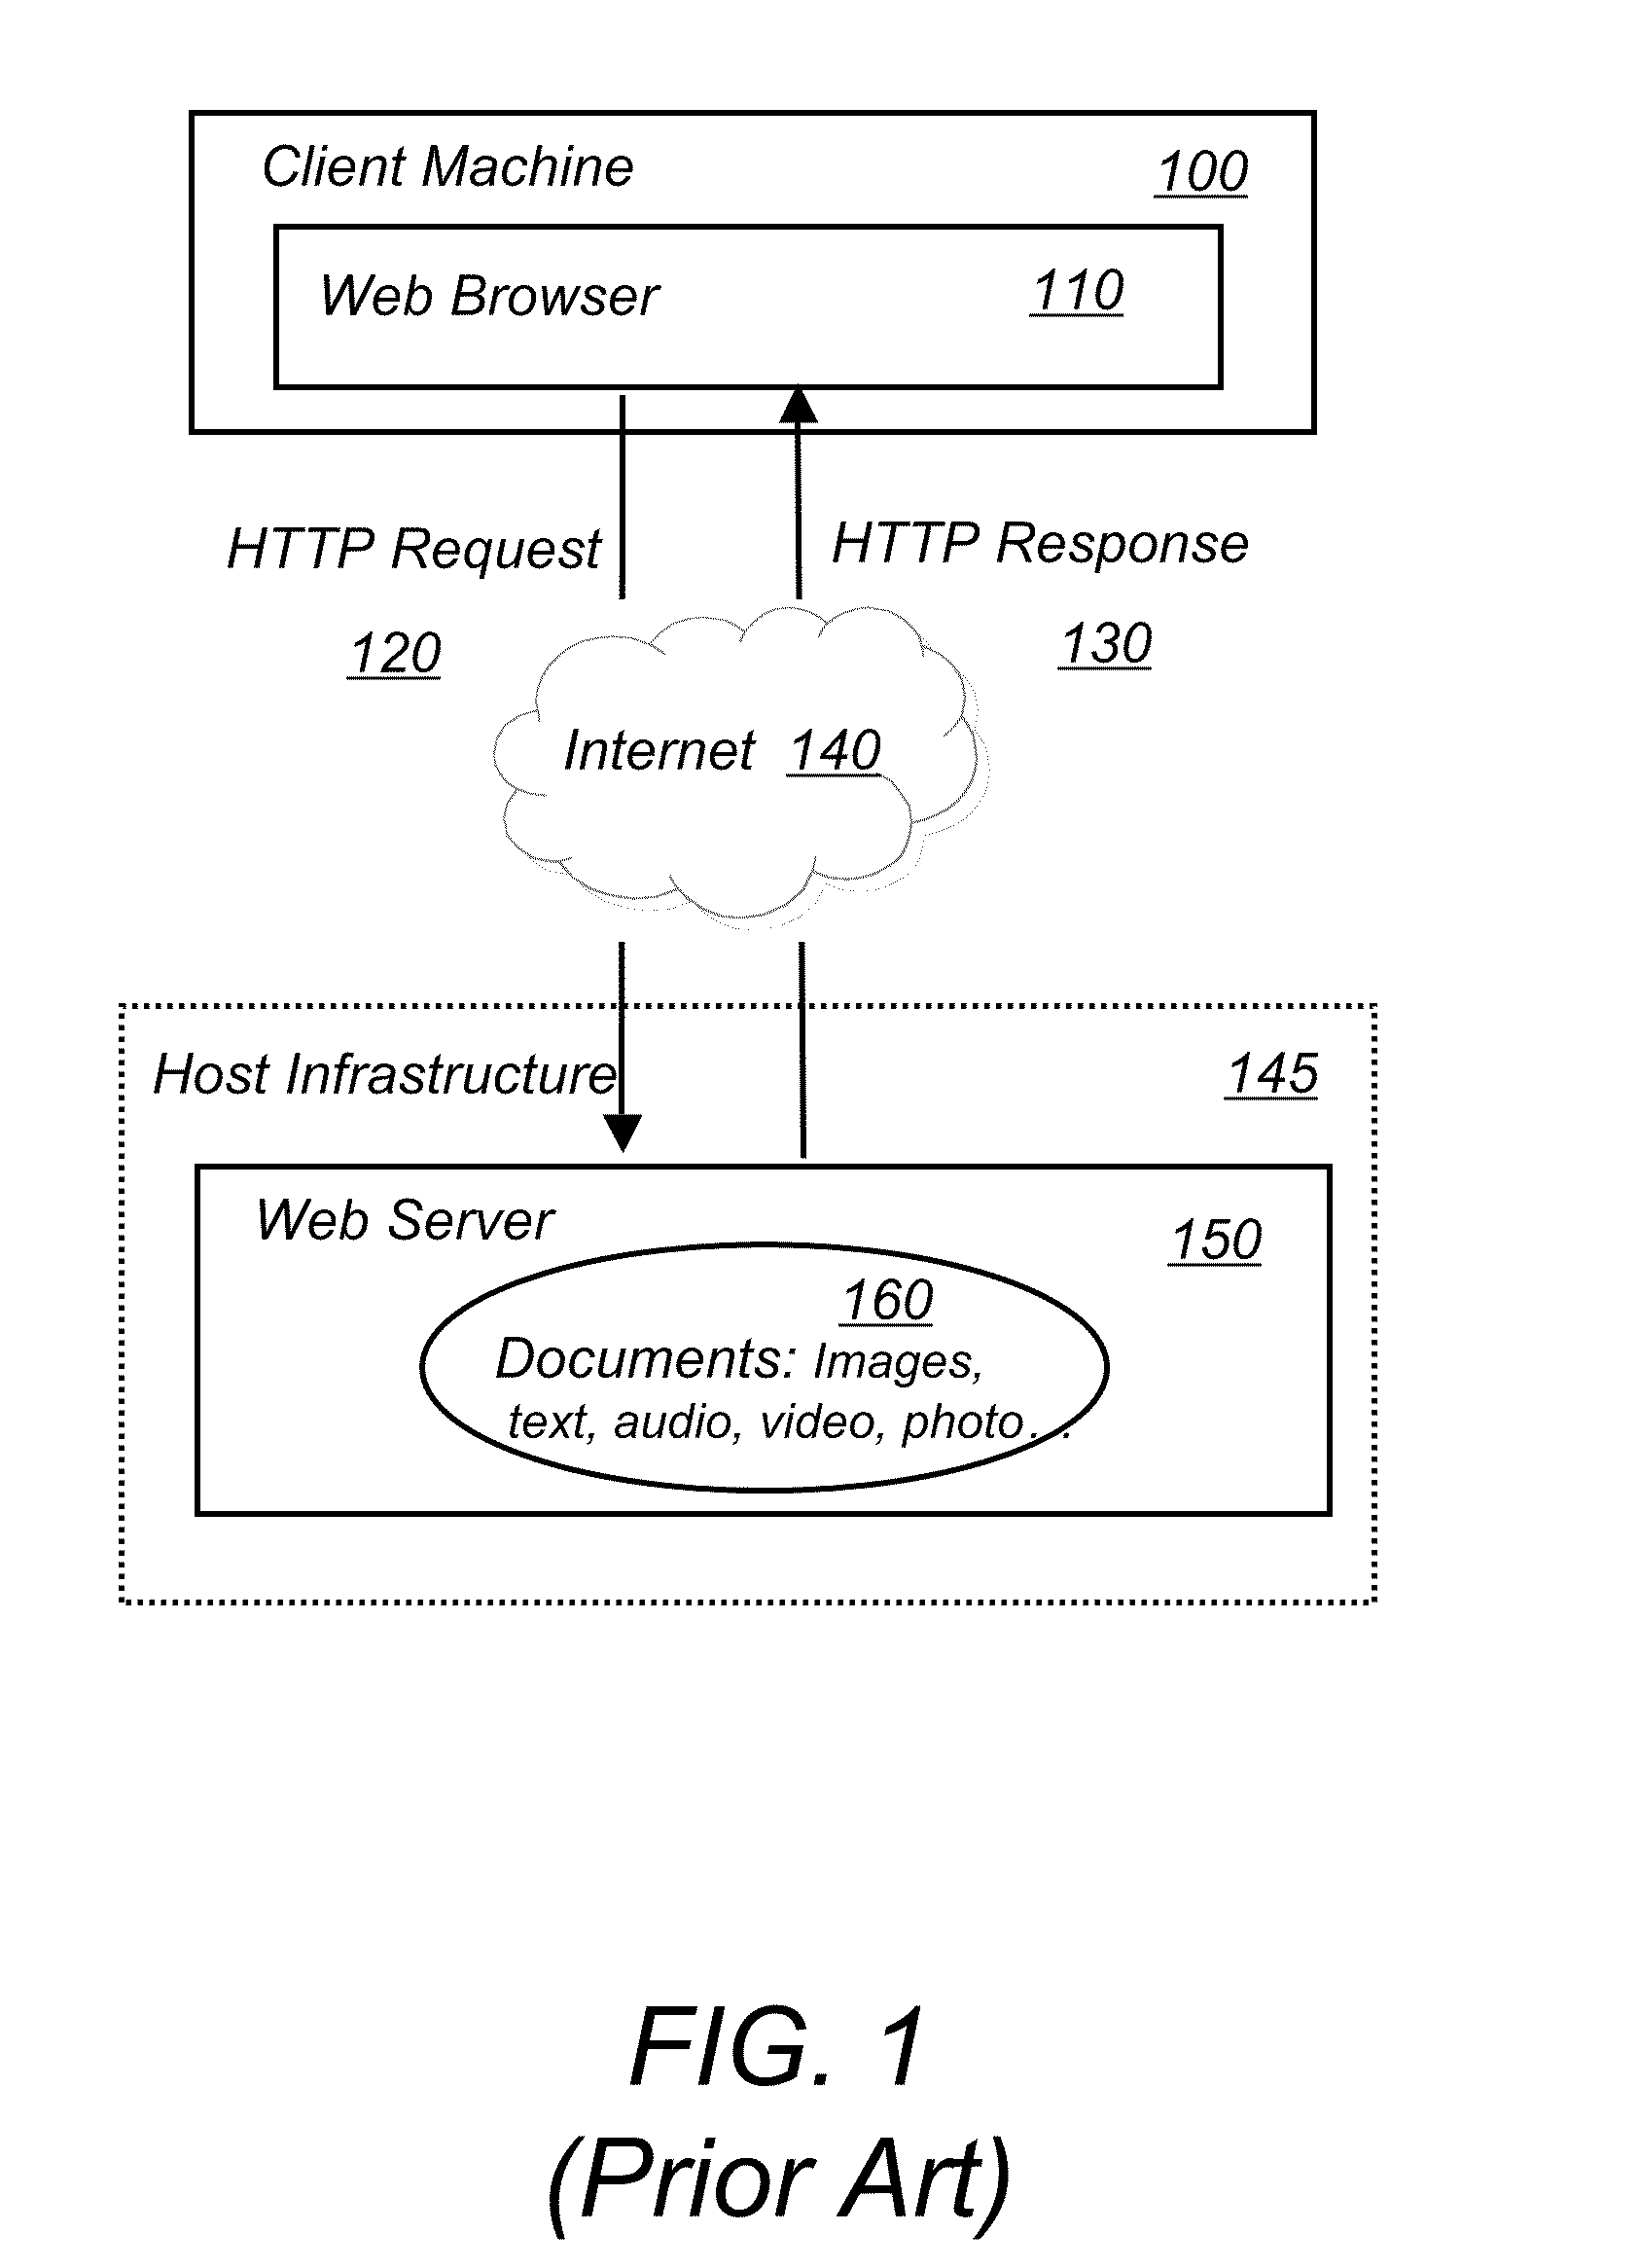 System and method for performance acceleration, data protection, disaster recovery and on-demand scaling of computer applications